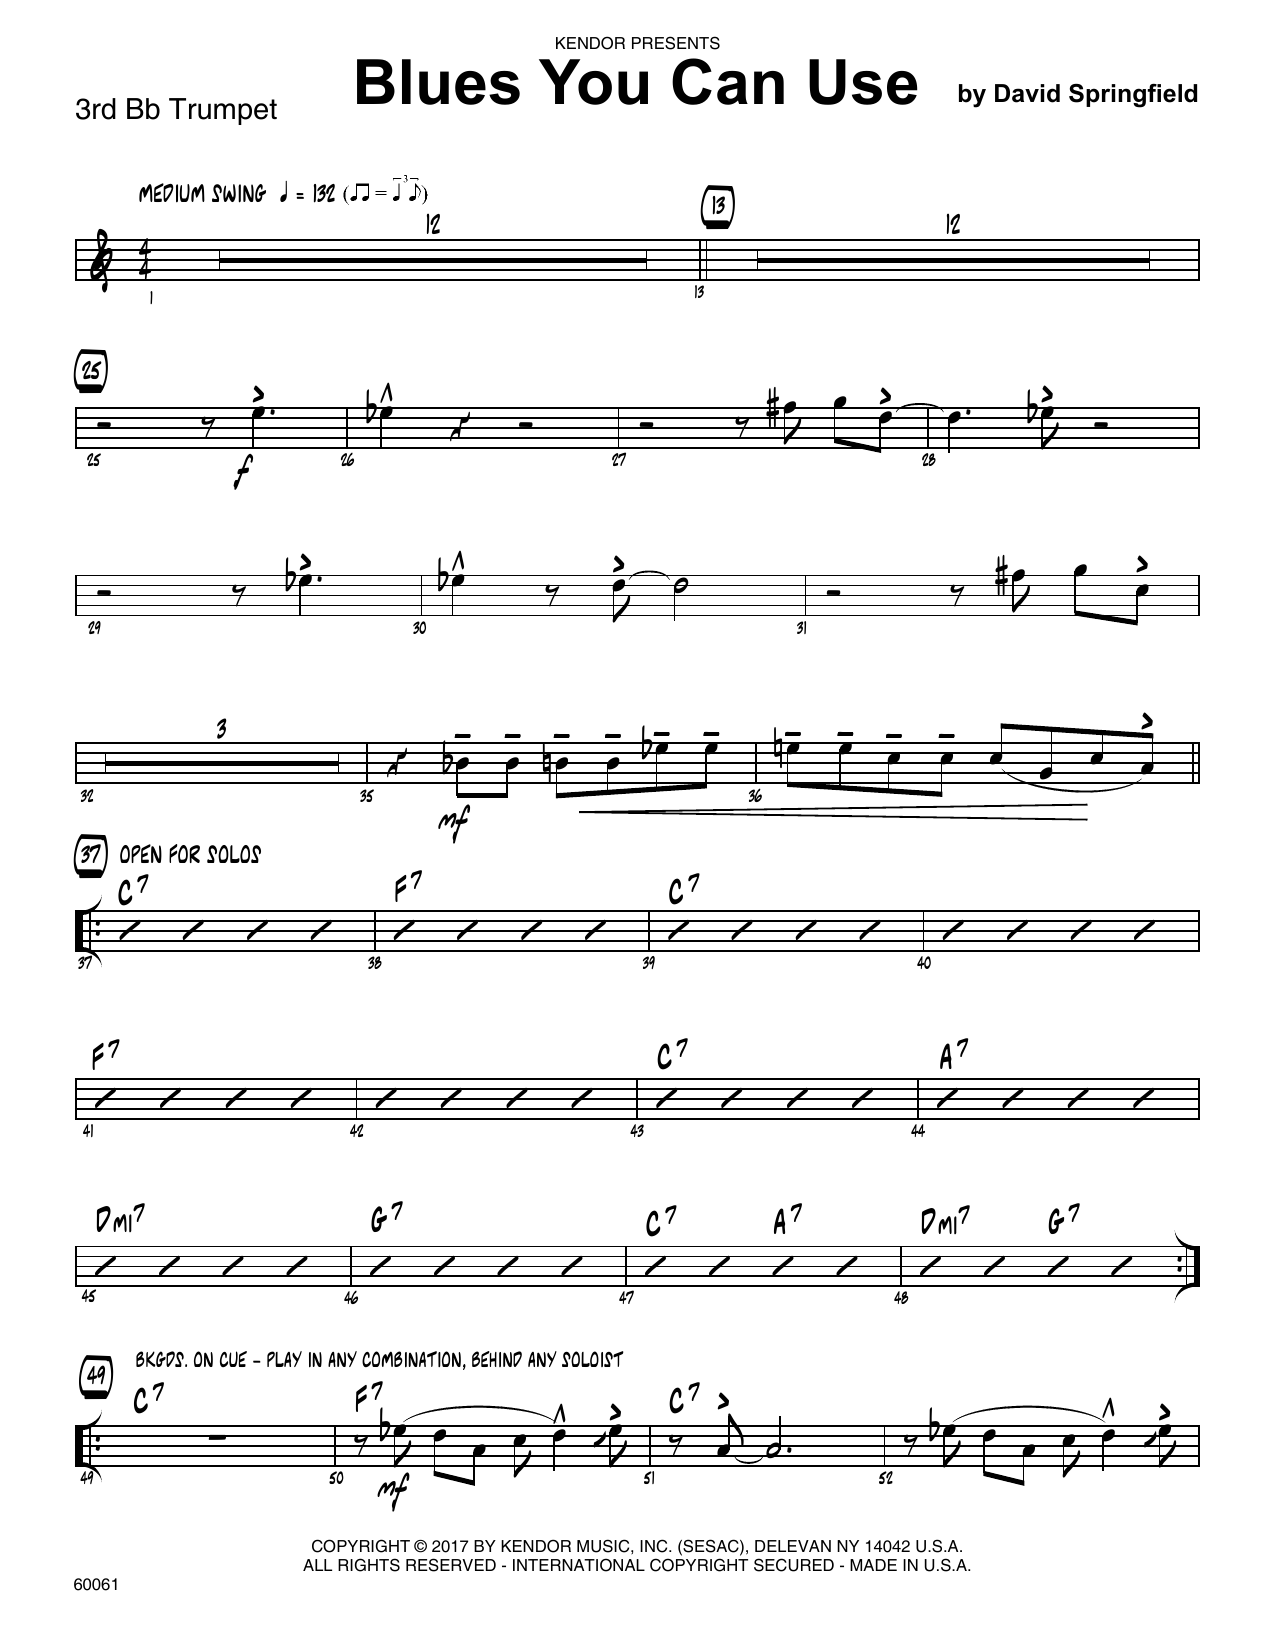 Download David Springfield Blues You Can Use - 3rd Bb Trumpet sheet music and printable PDF score & Jazz music notes